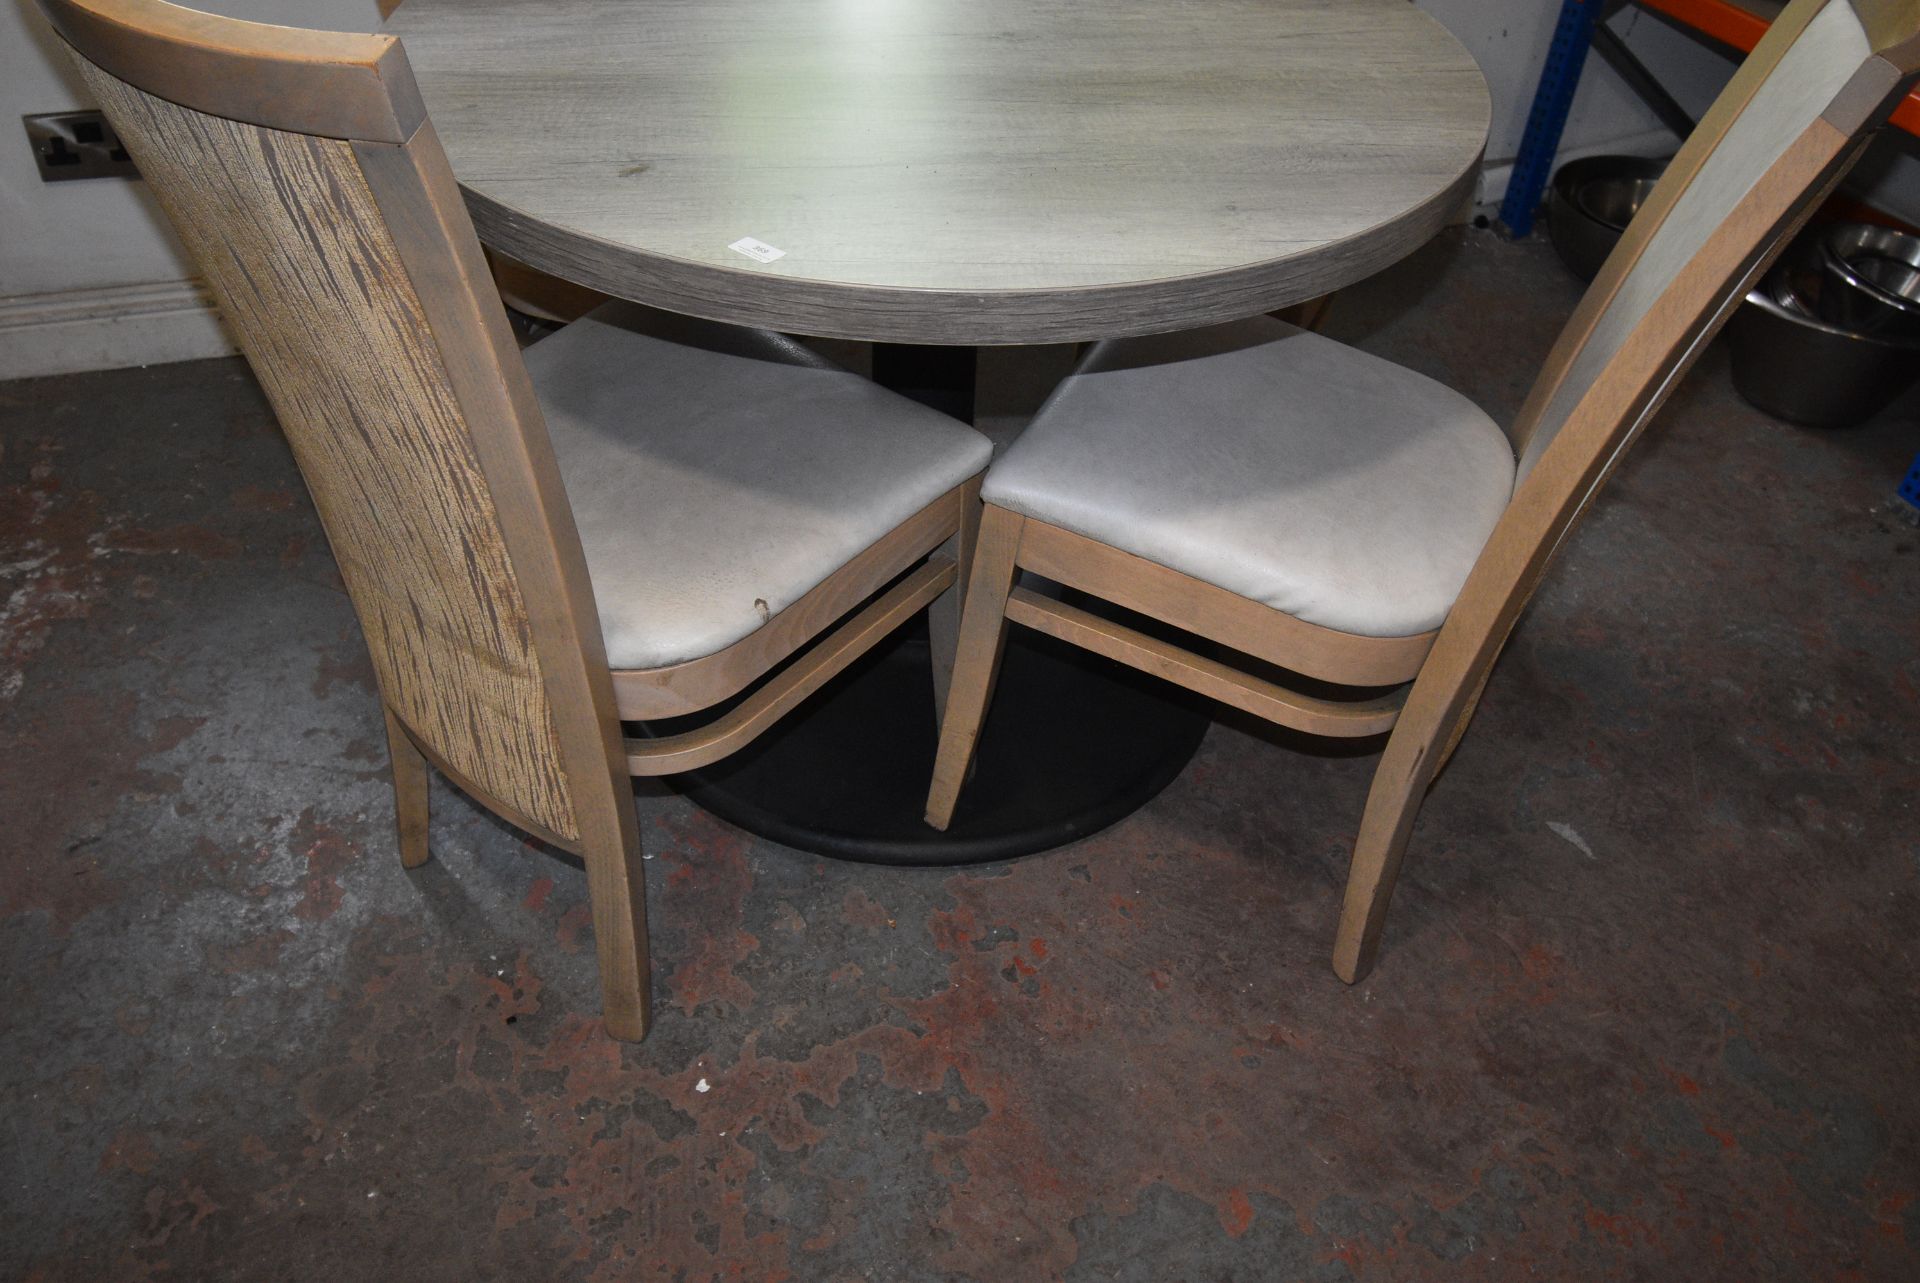 100cm Circular Single Pedestal Table with Four Chairs - Image 2 of 2